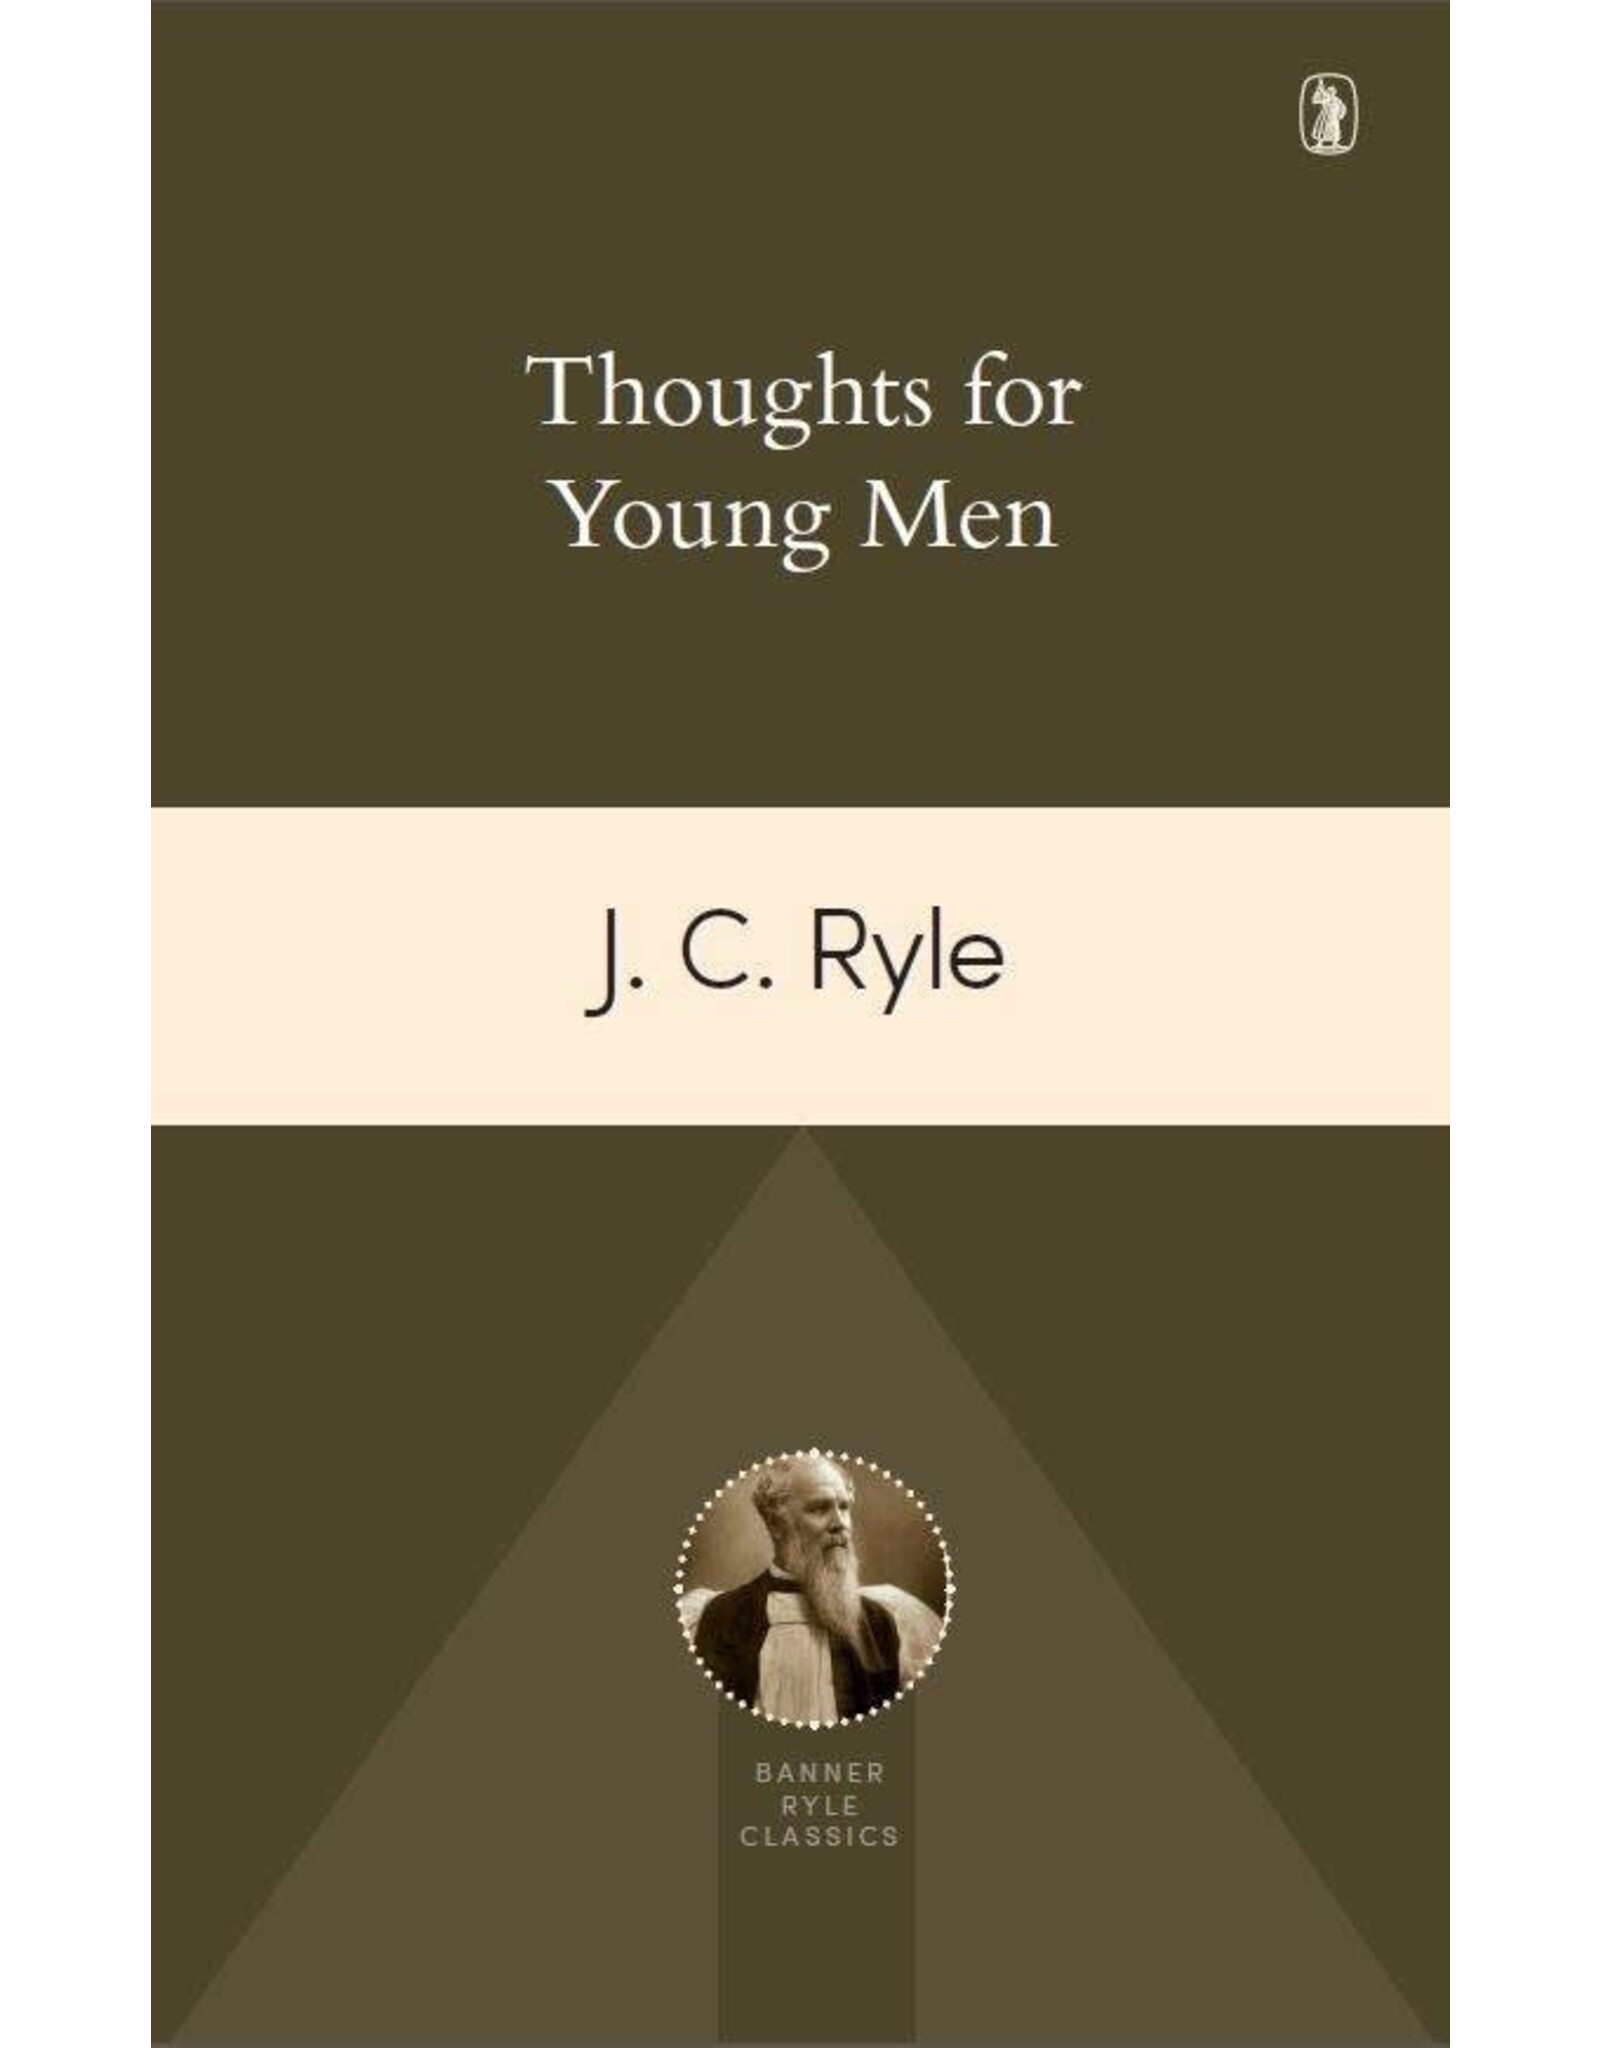 J. C. Ryle Thoughts For Young Men - An Exhortation Directed to Those in the Prime of Life